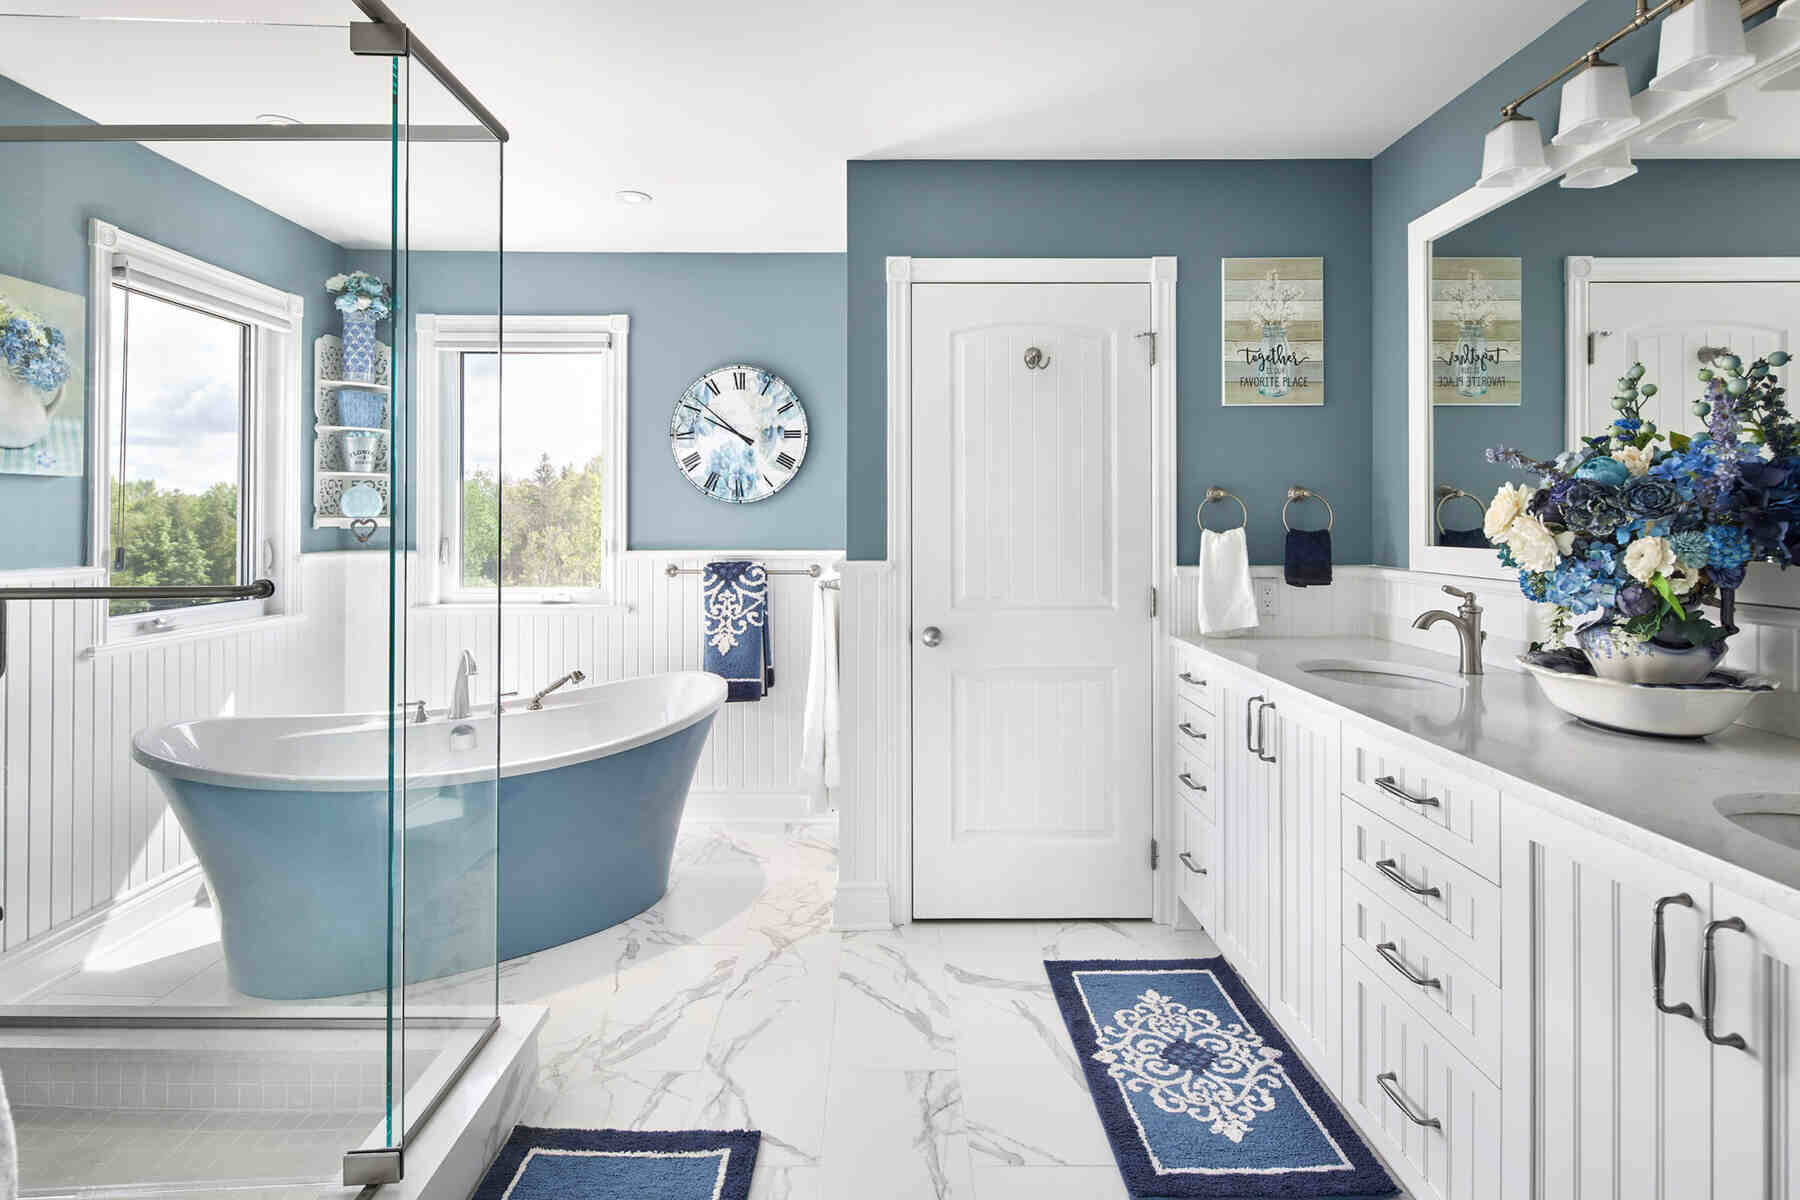 Bathroom with blue and white accents and a bath tub and clear glass shower panels